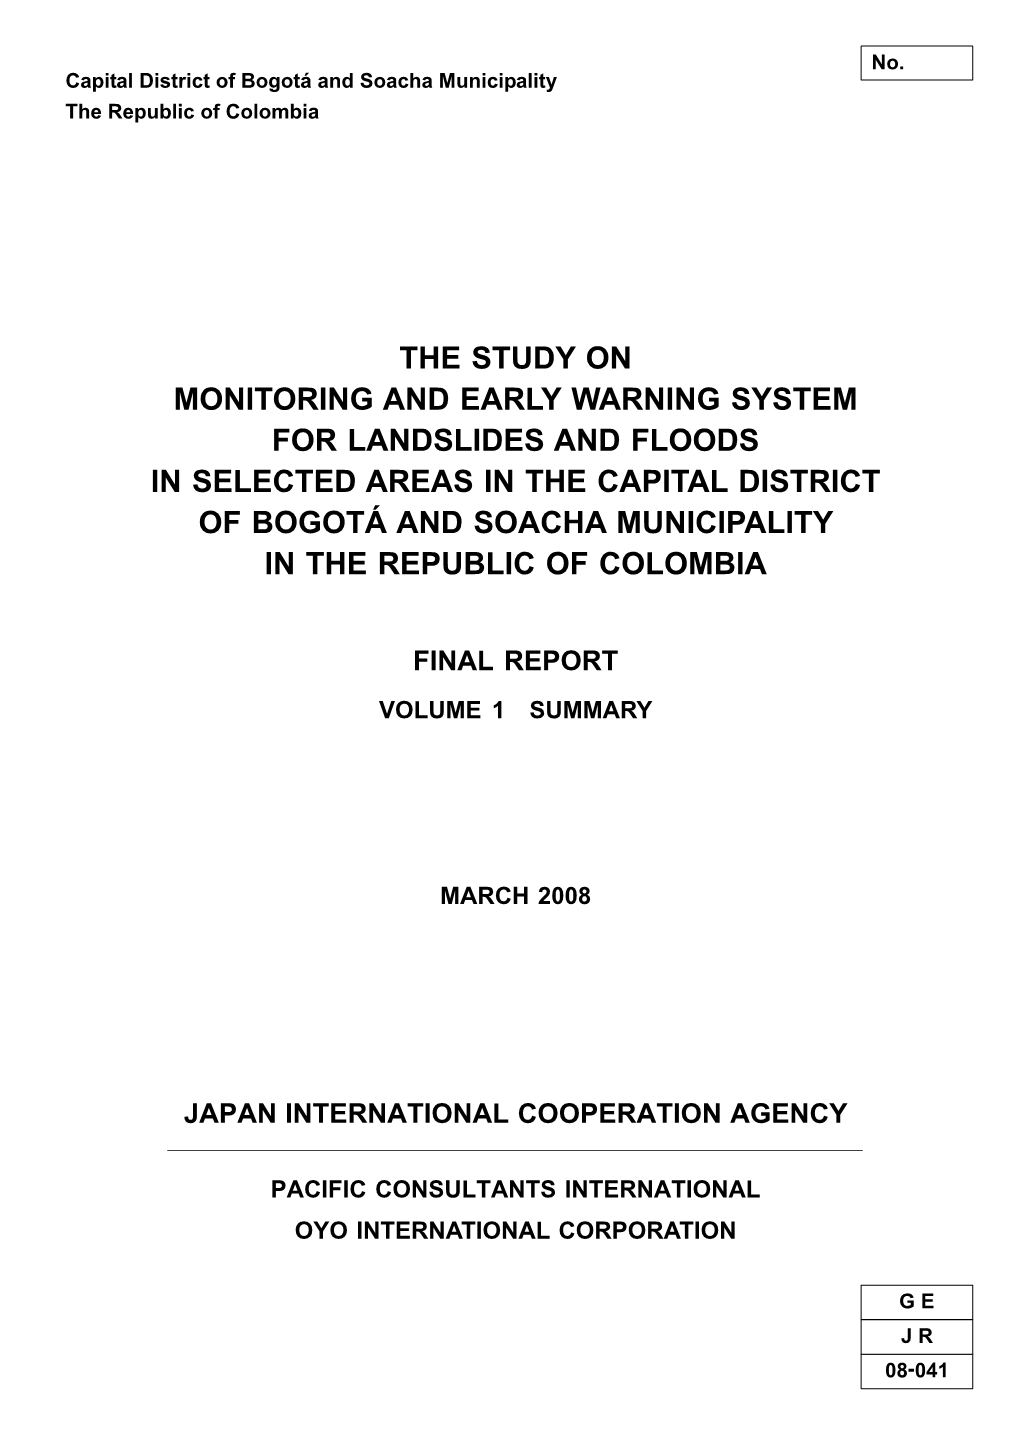 The Study on Monitoring and Early Warning System for Landslides and Floods in Selected Areas in the Capital District of Bogot